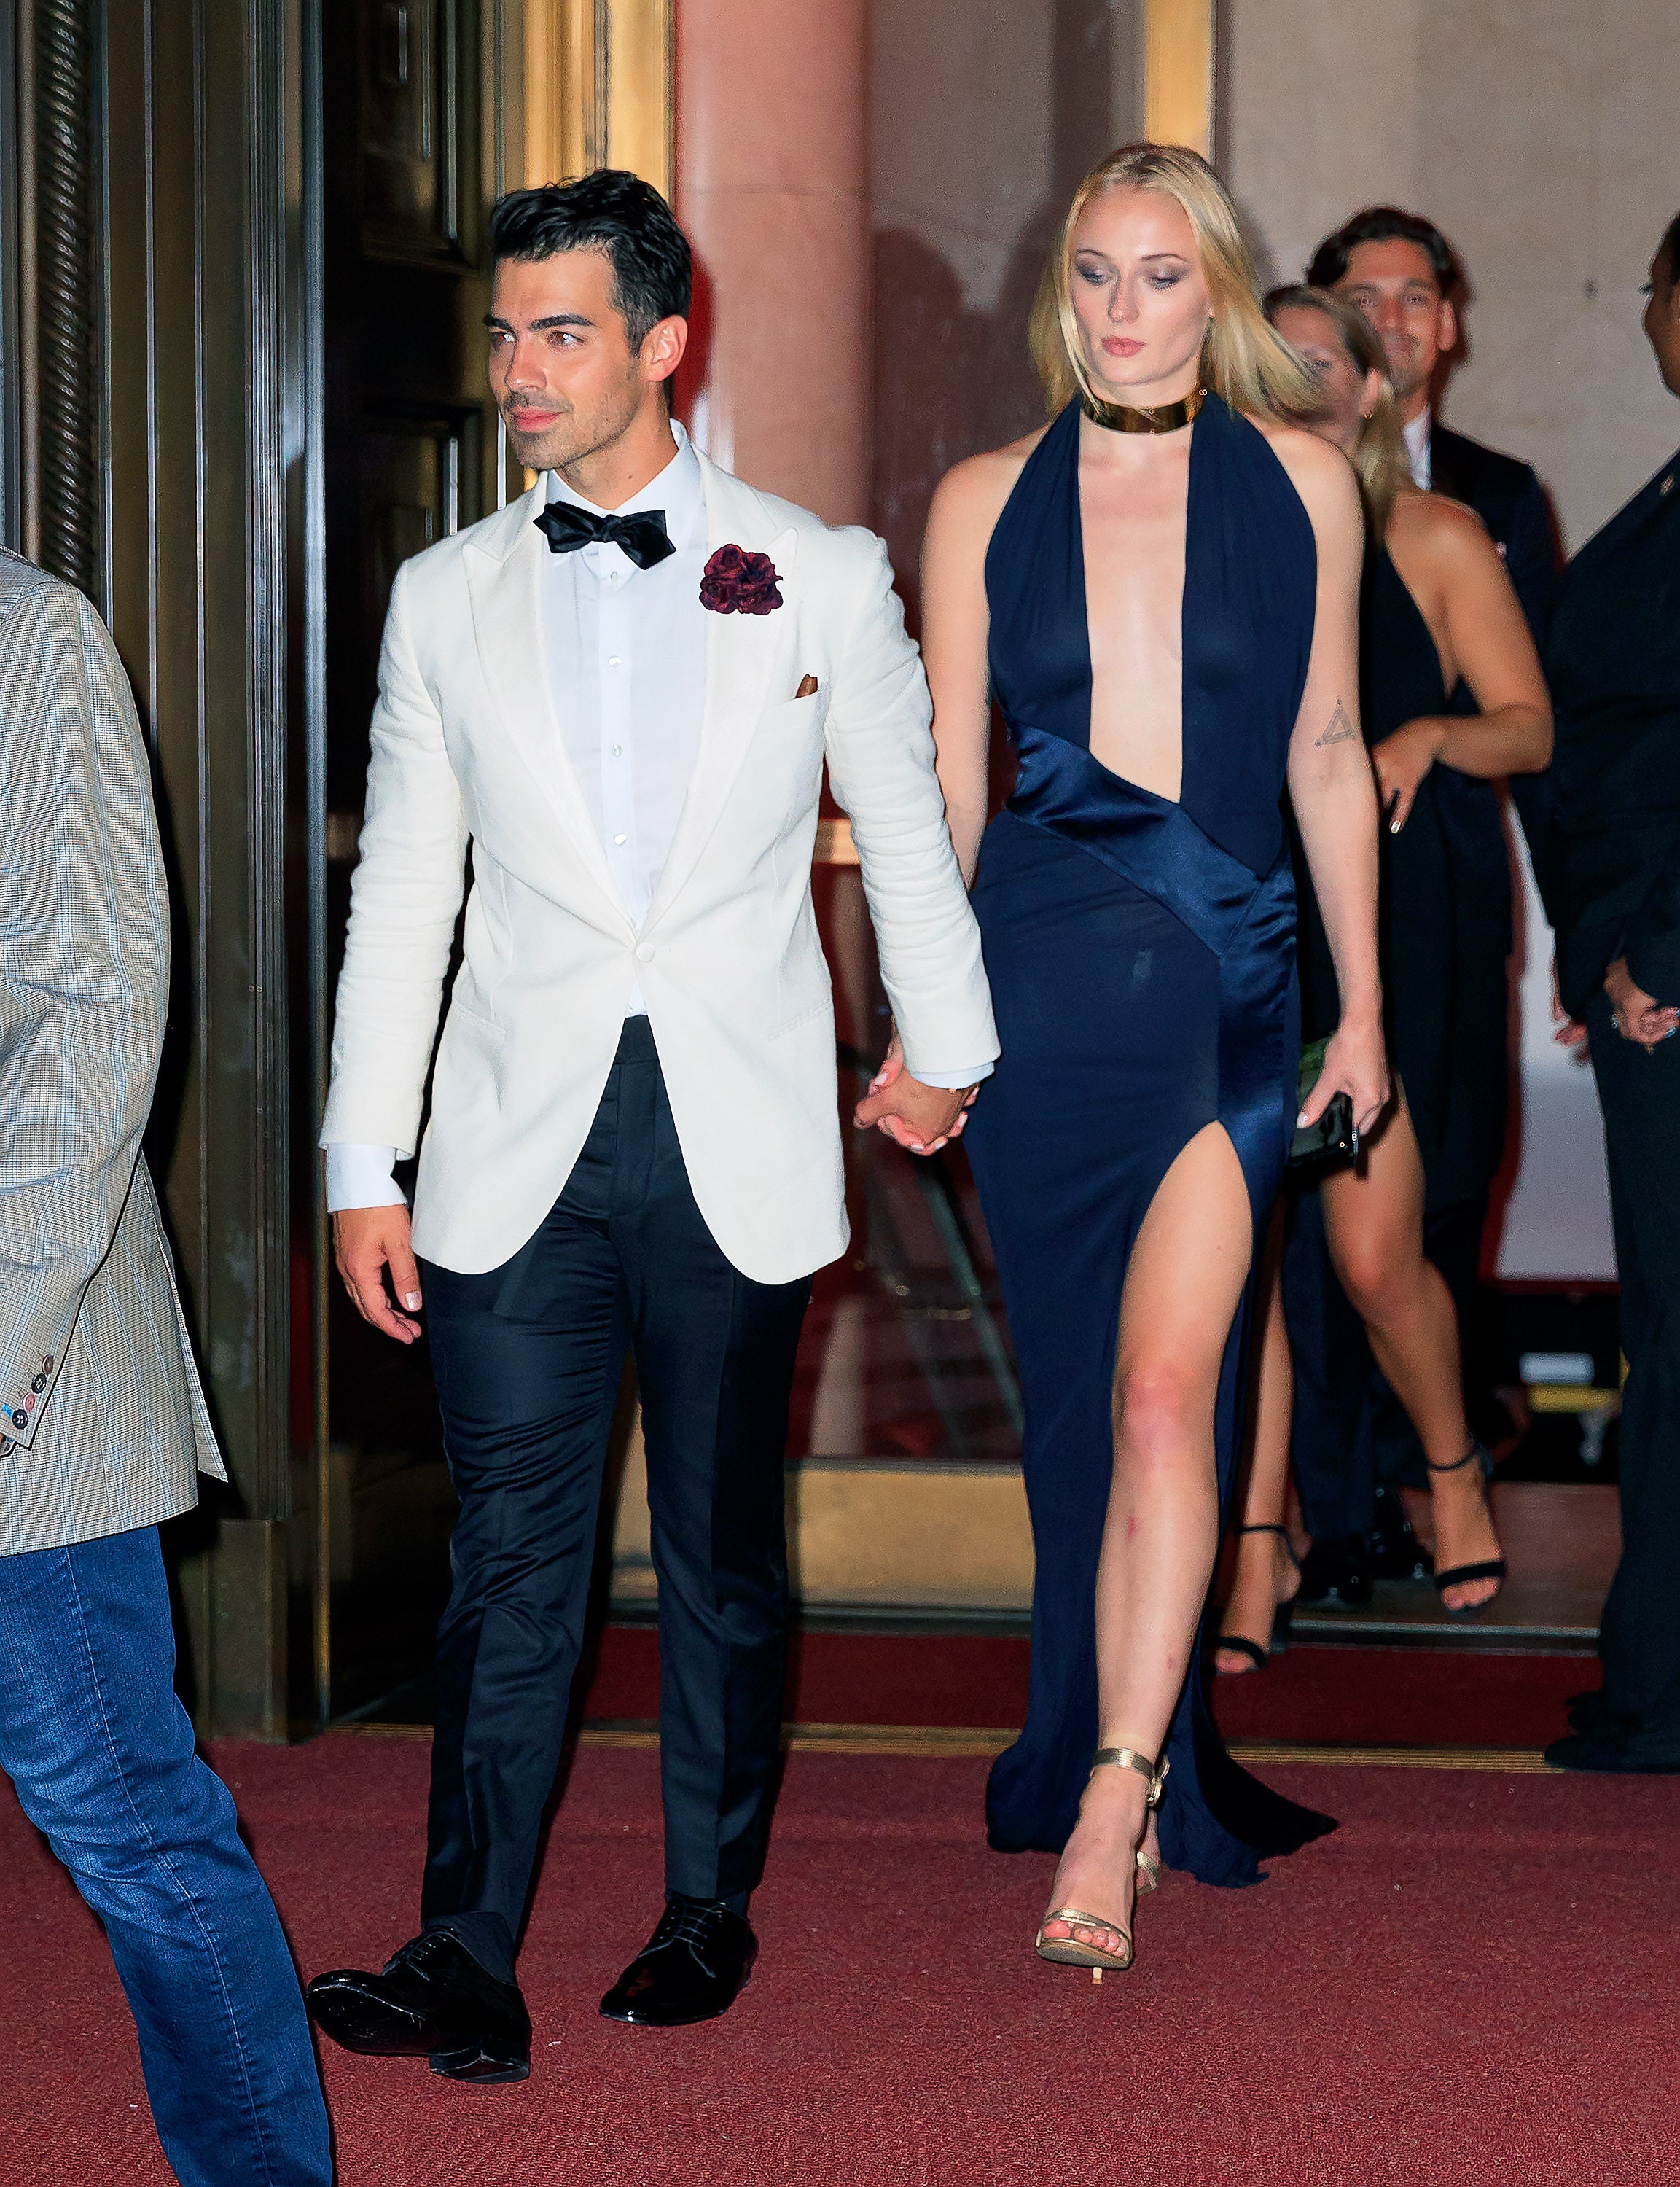 Fashion, Shopping & Style, I'm Not Even Looking at Joe Jonas in His Tux  When Sophie Turner Is Wearing This Hot Pink Gown